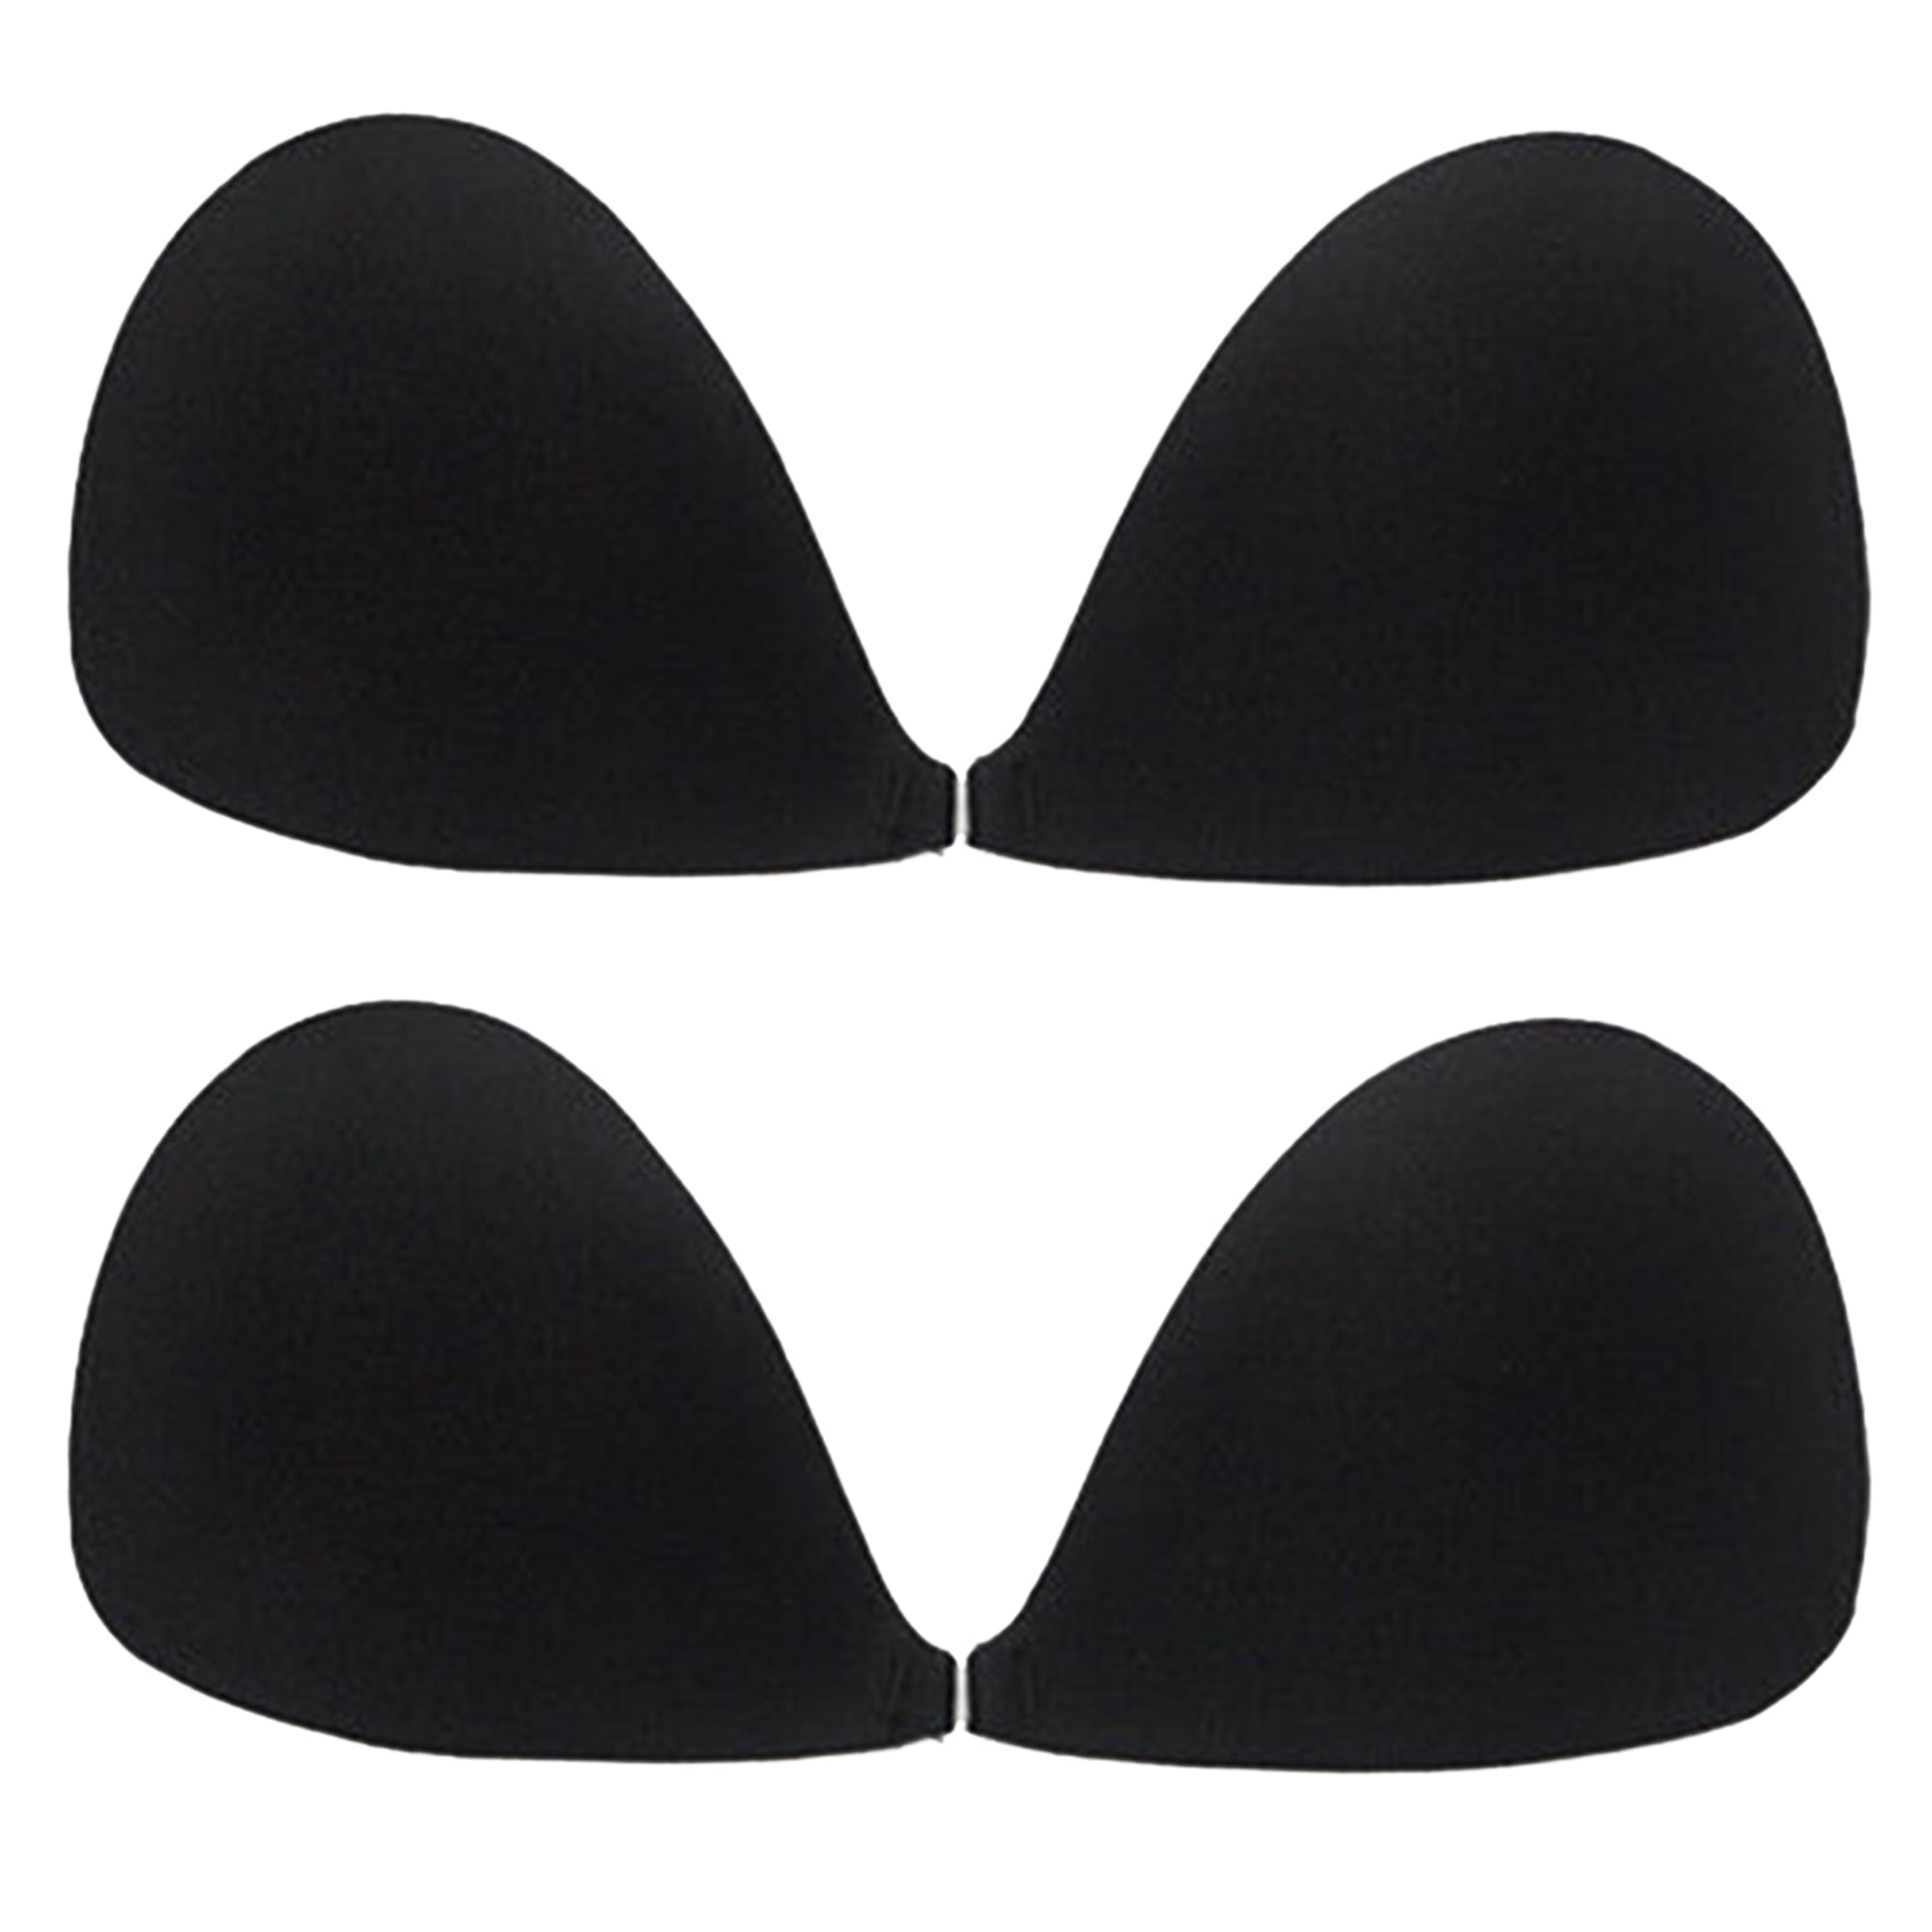 Olamtai Adhesive Bra Push Up Strapless Invisible Sticky Silicone Bra  Reusable Backless Silicone Bra for Women Backless Dress - Nude Size B